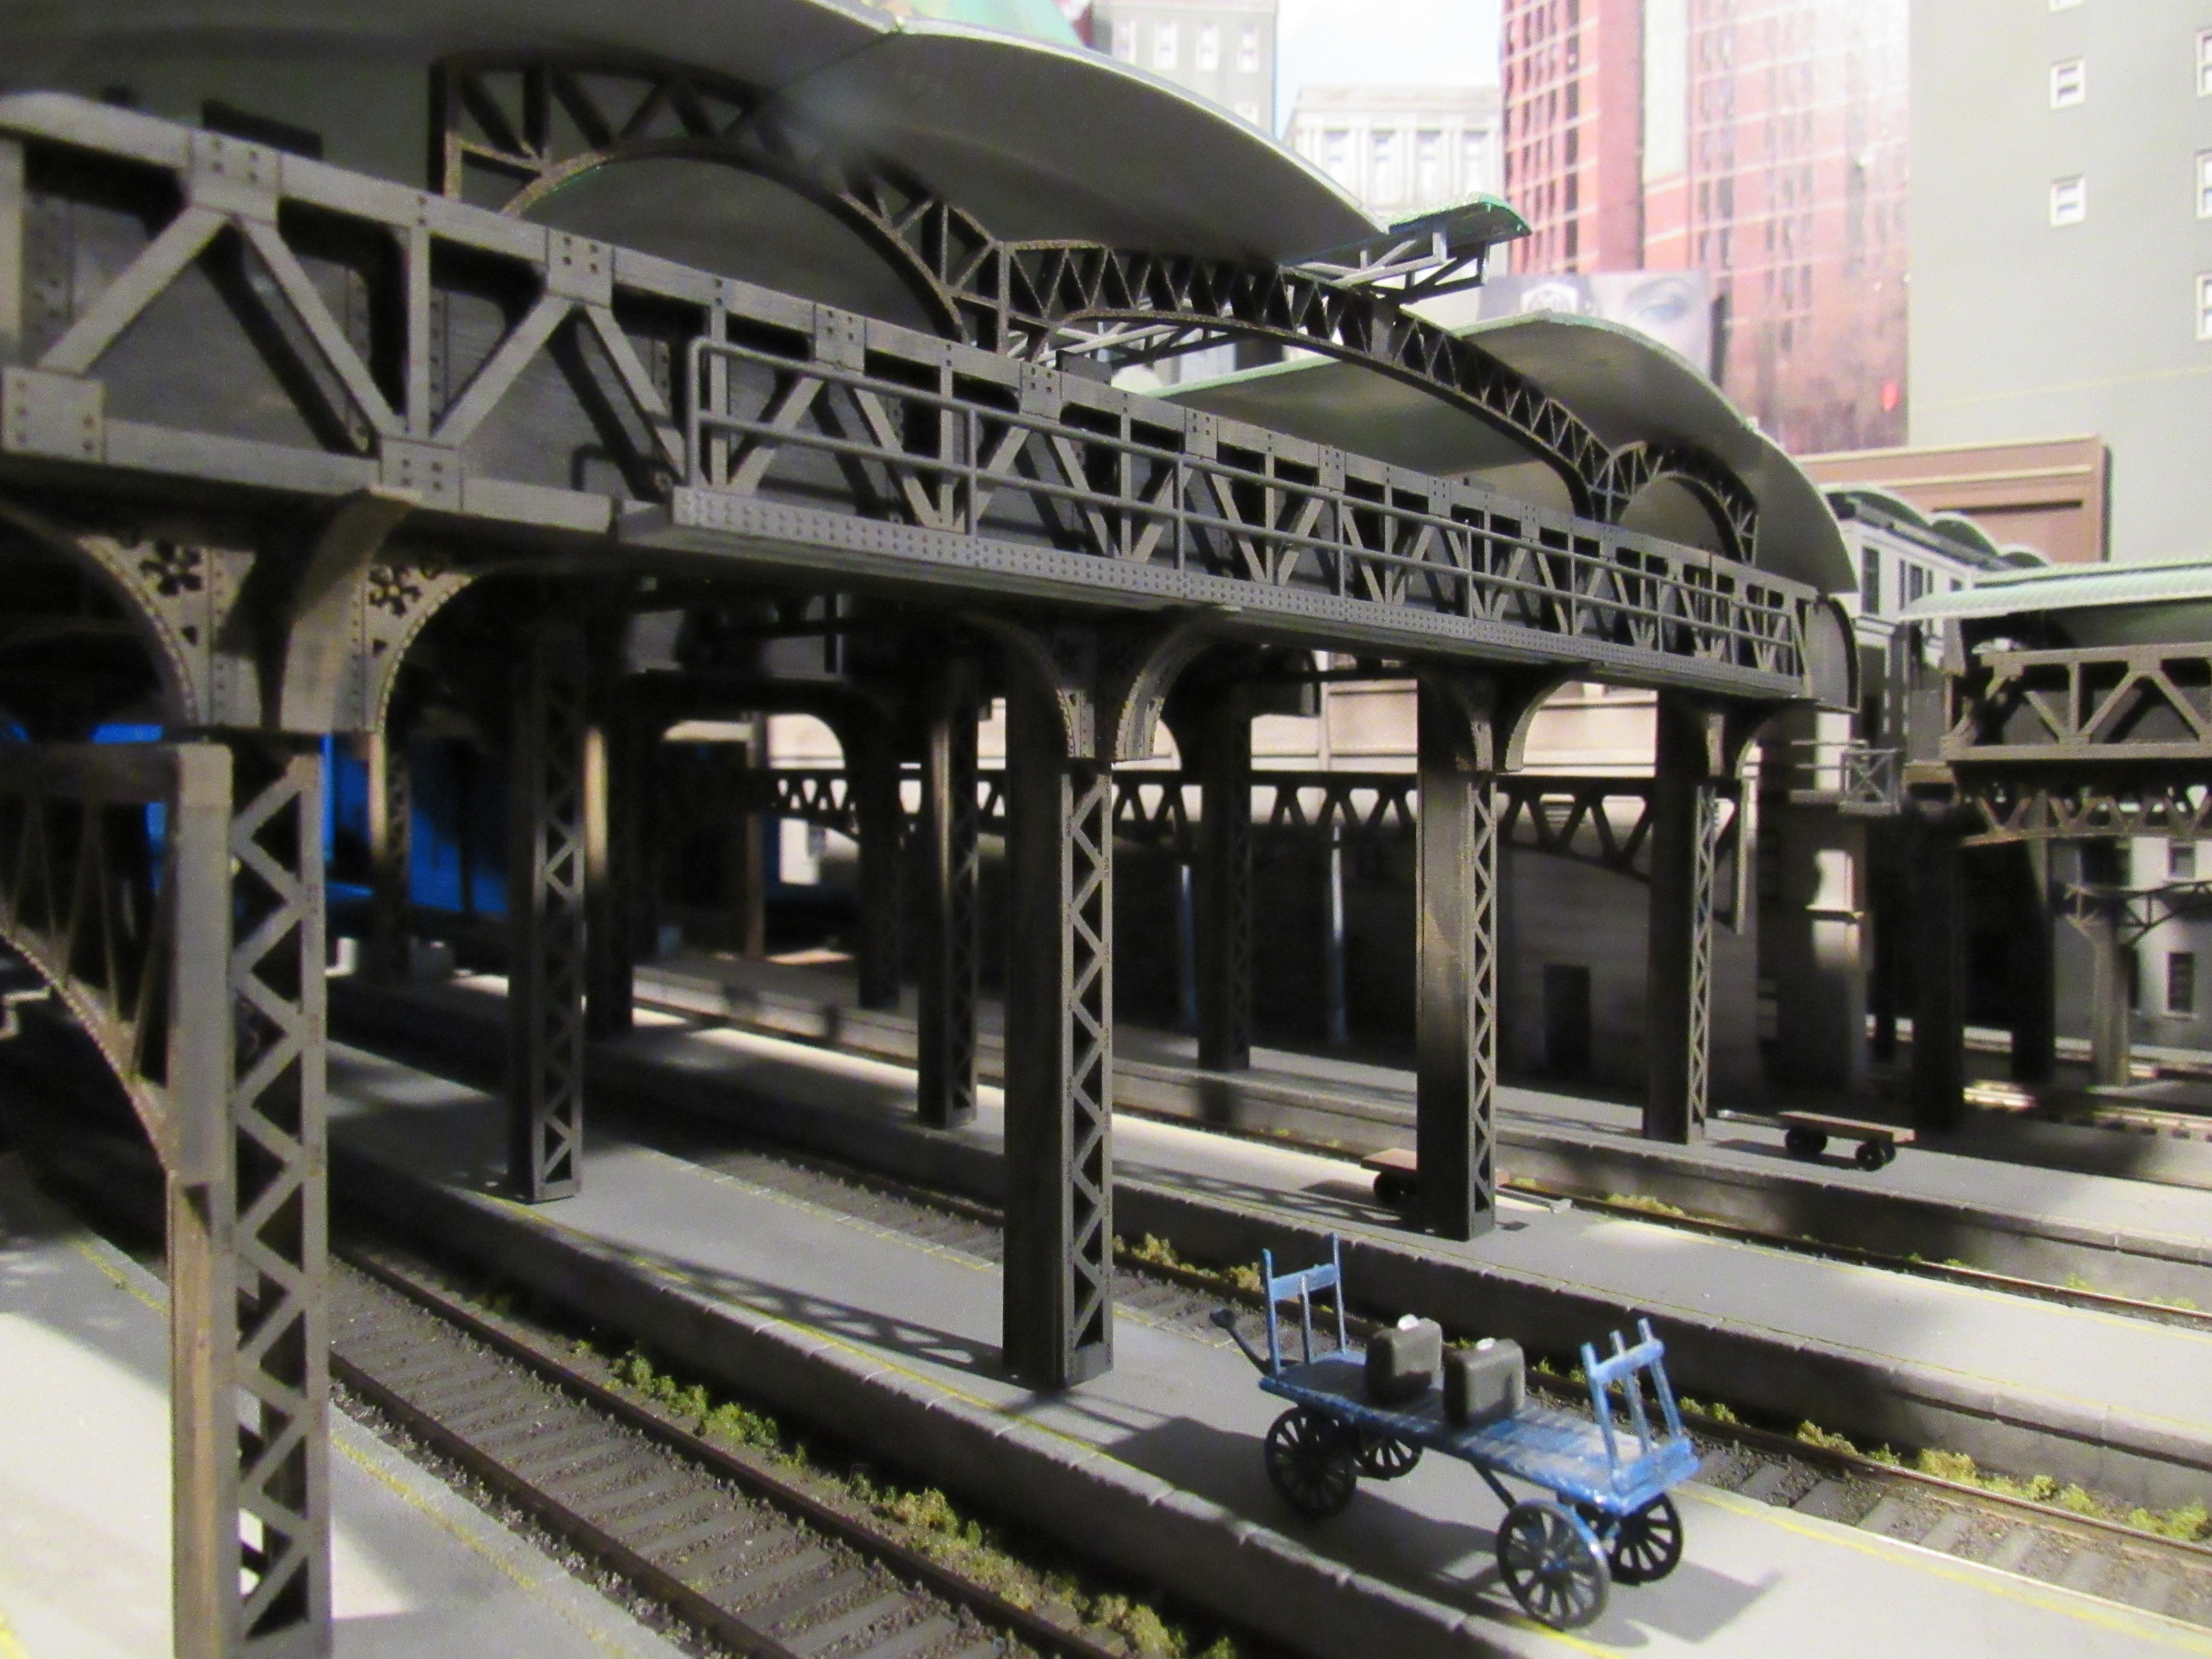 Chris P's structural steel train shed